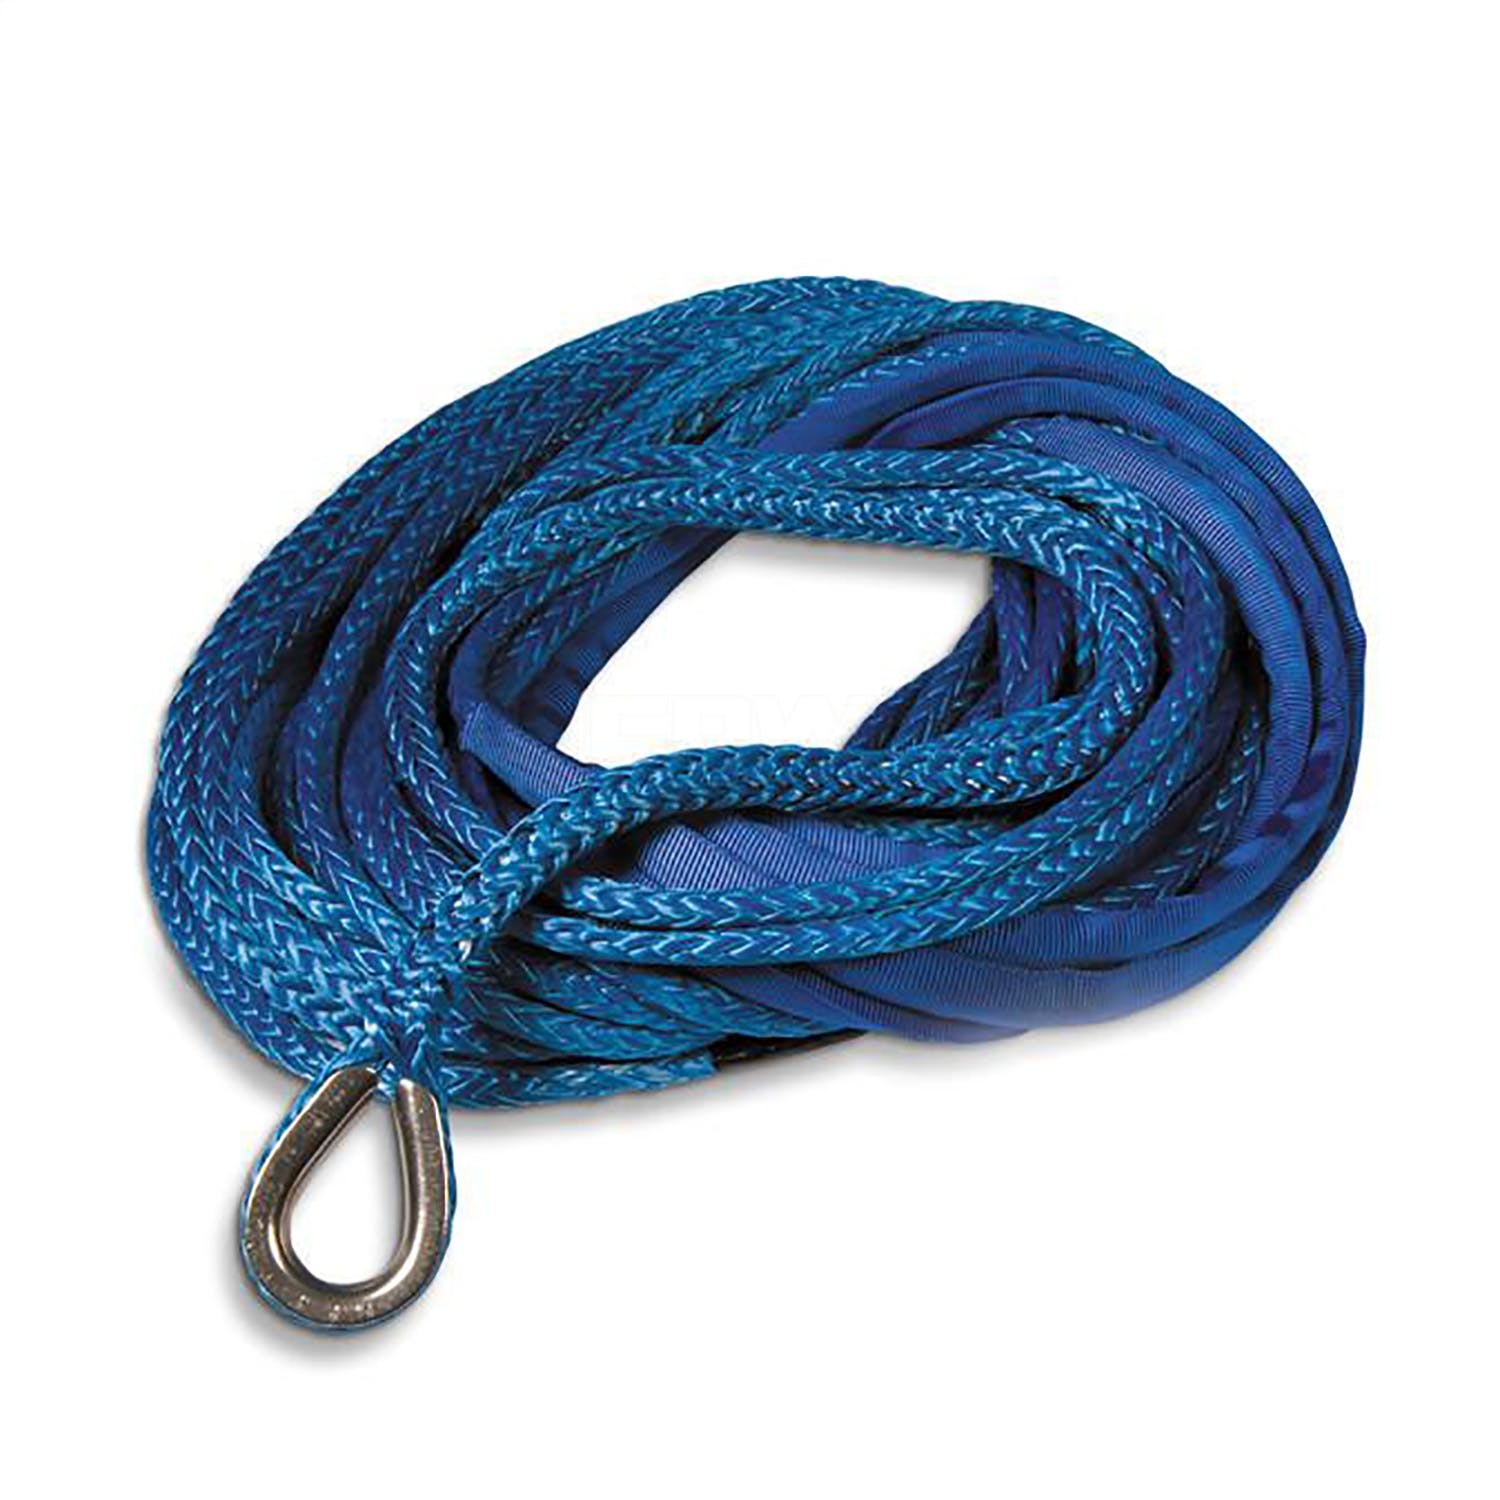 Superwinch 90-24564 Replacement Synthetic Dyneema Rope 1/2 diameter x 90 length for Talon